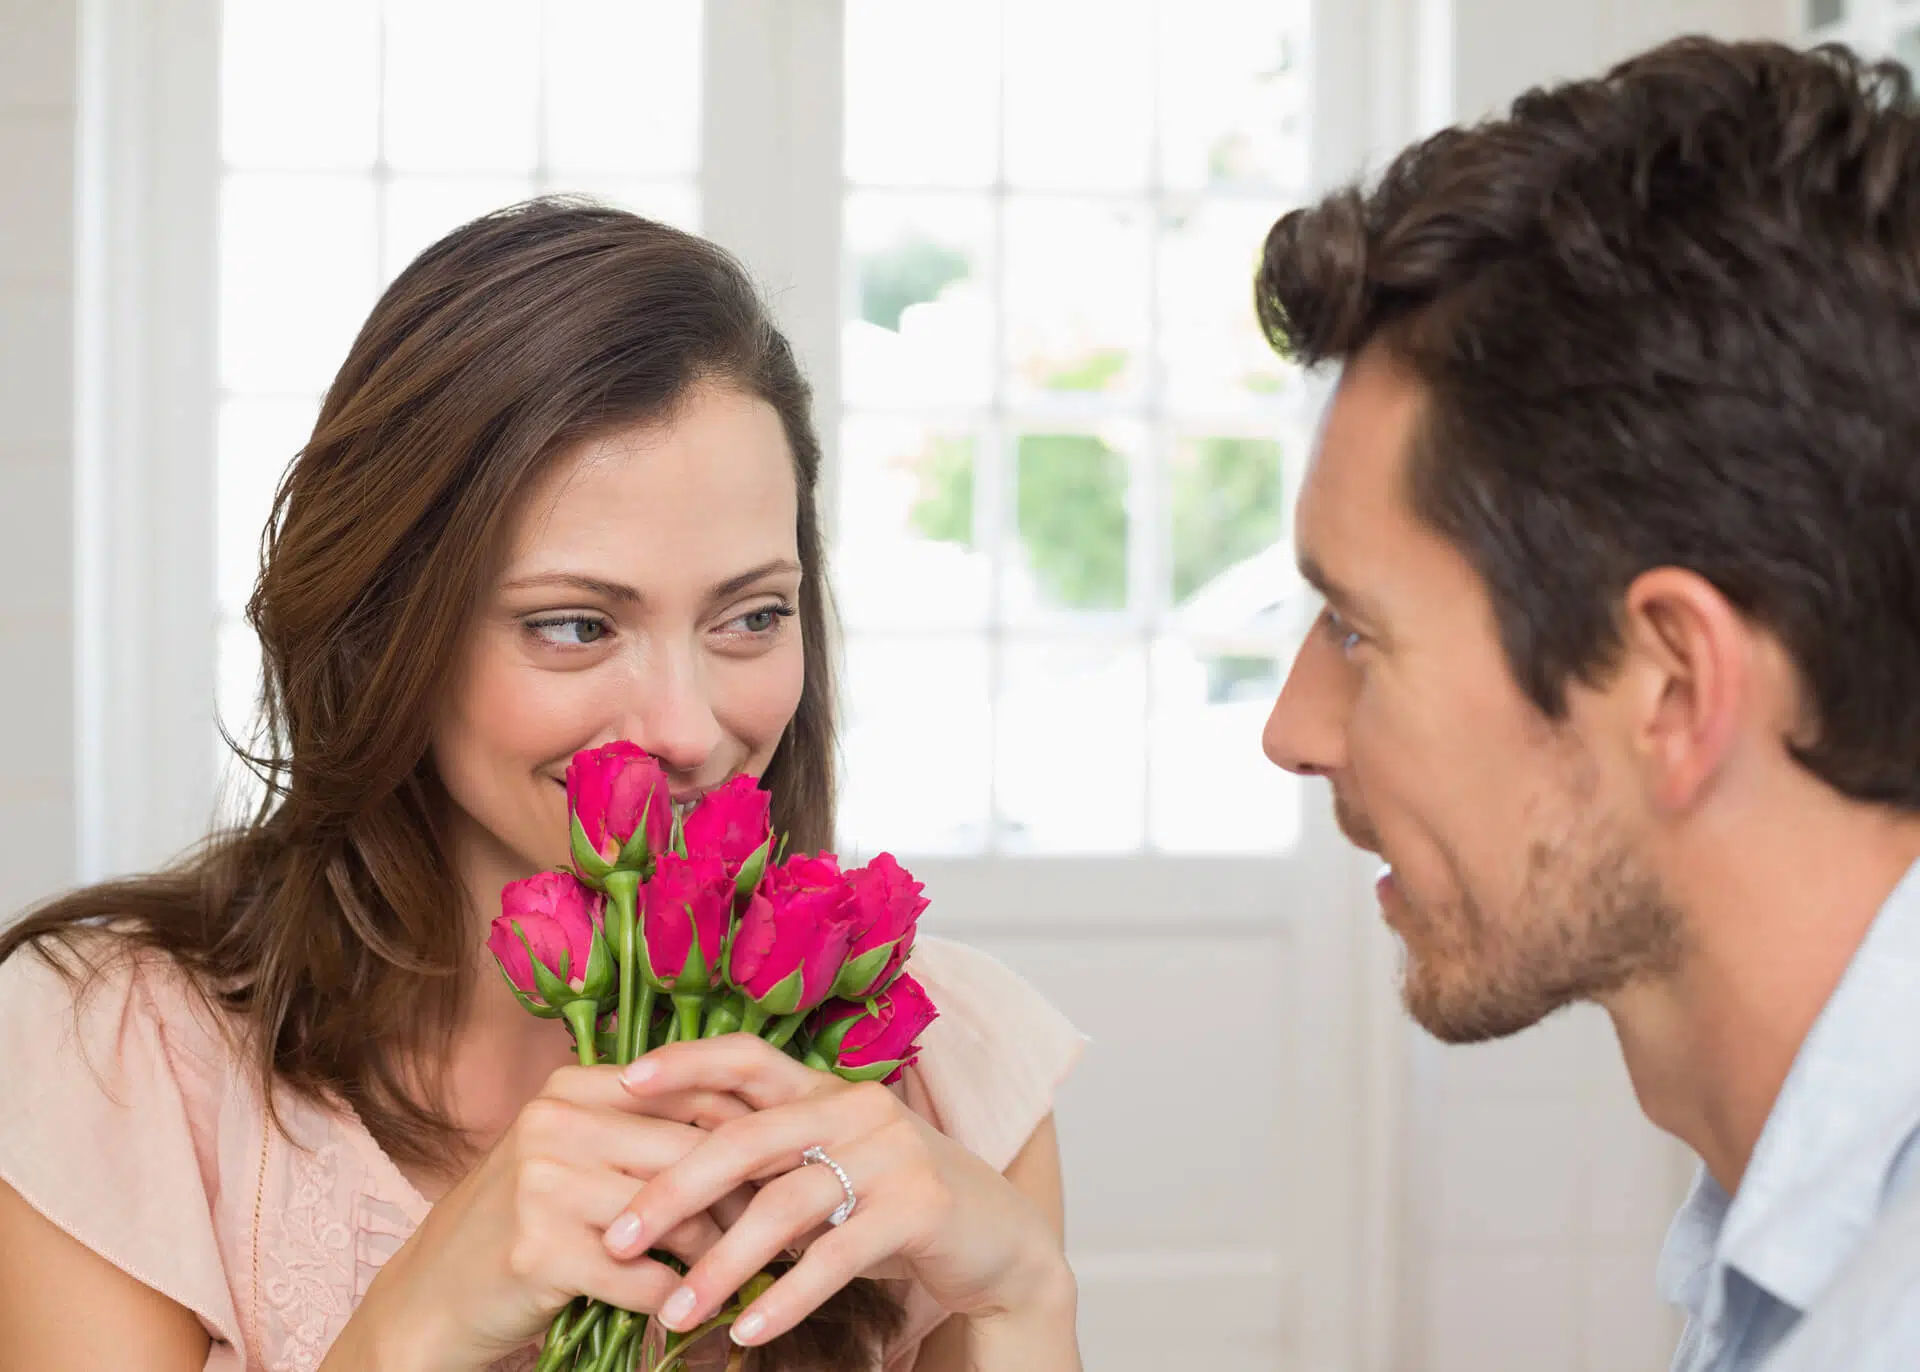 man lovingly looking at a woman with flowers